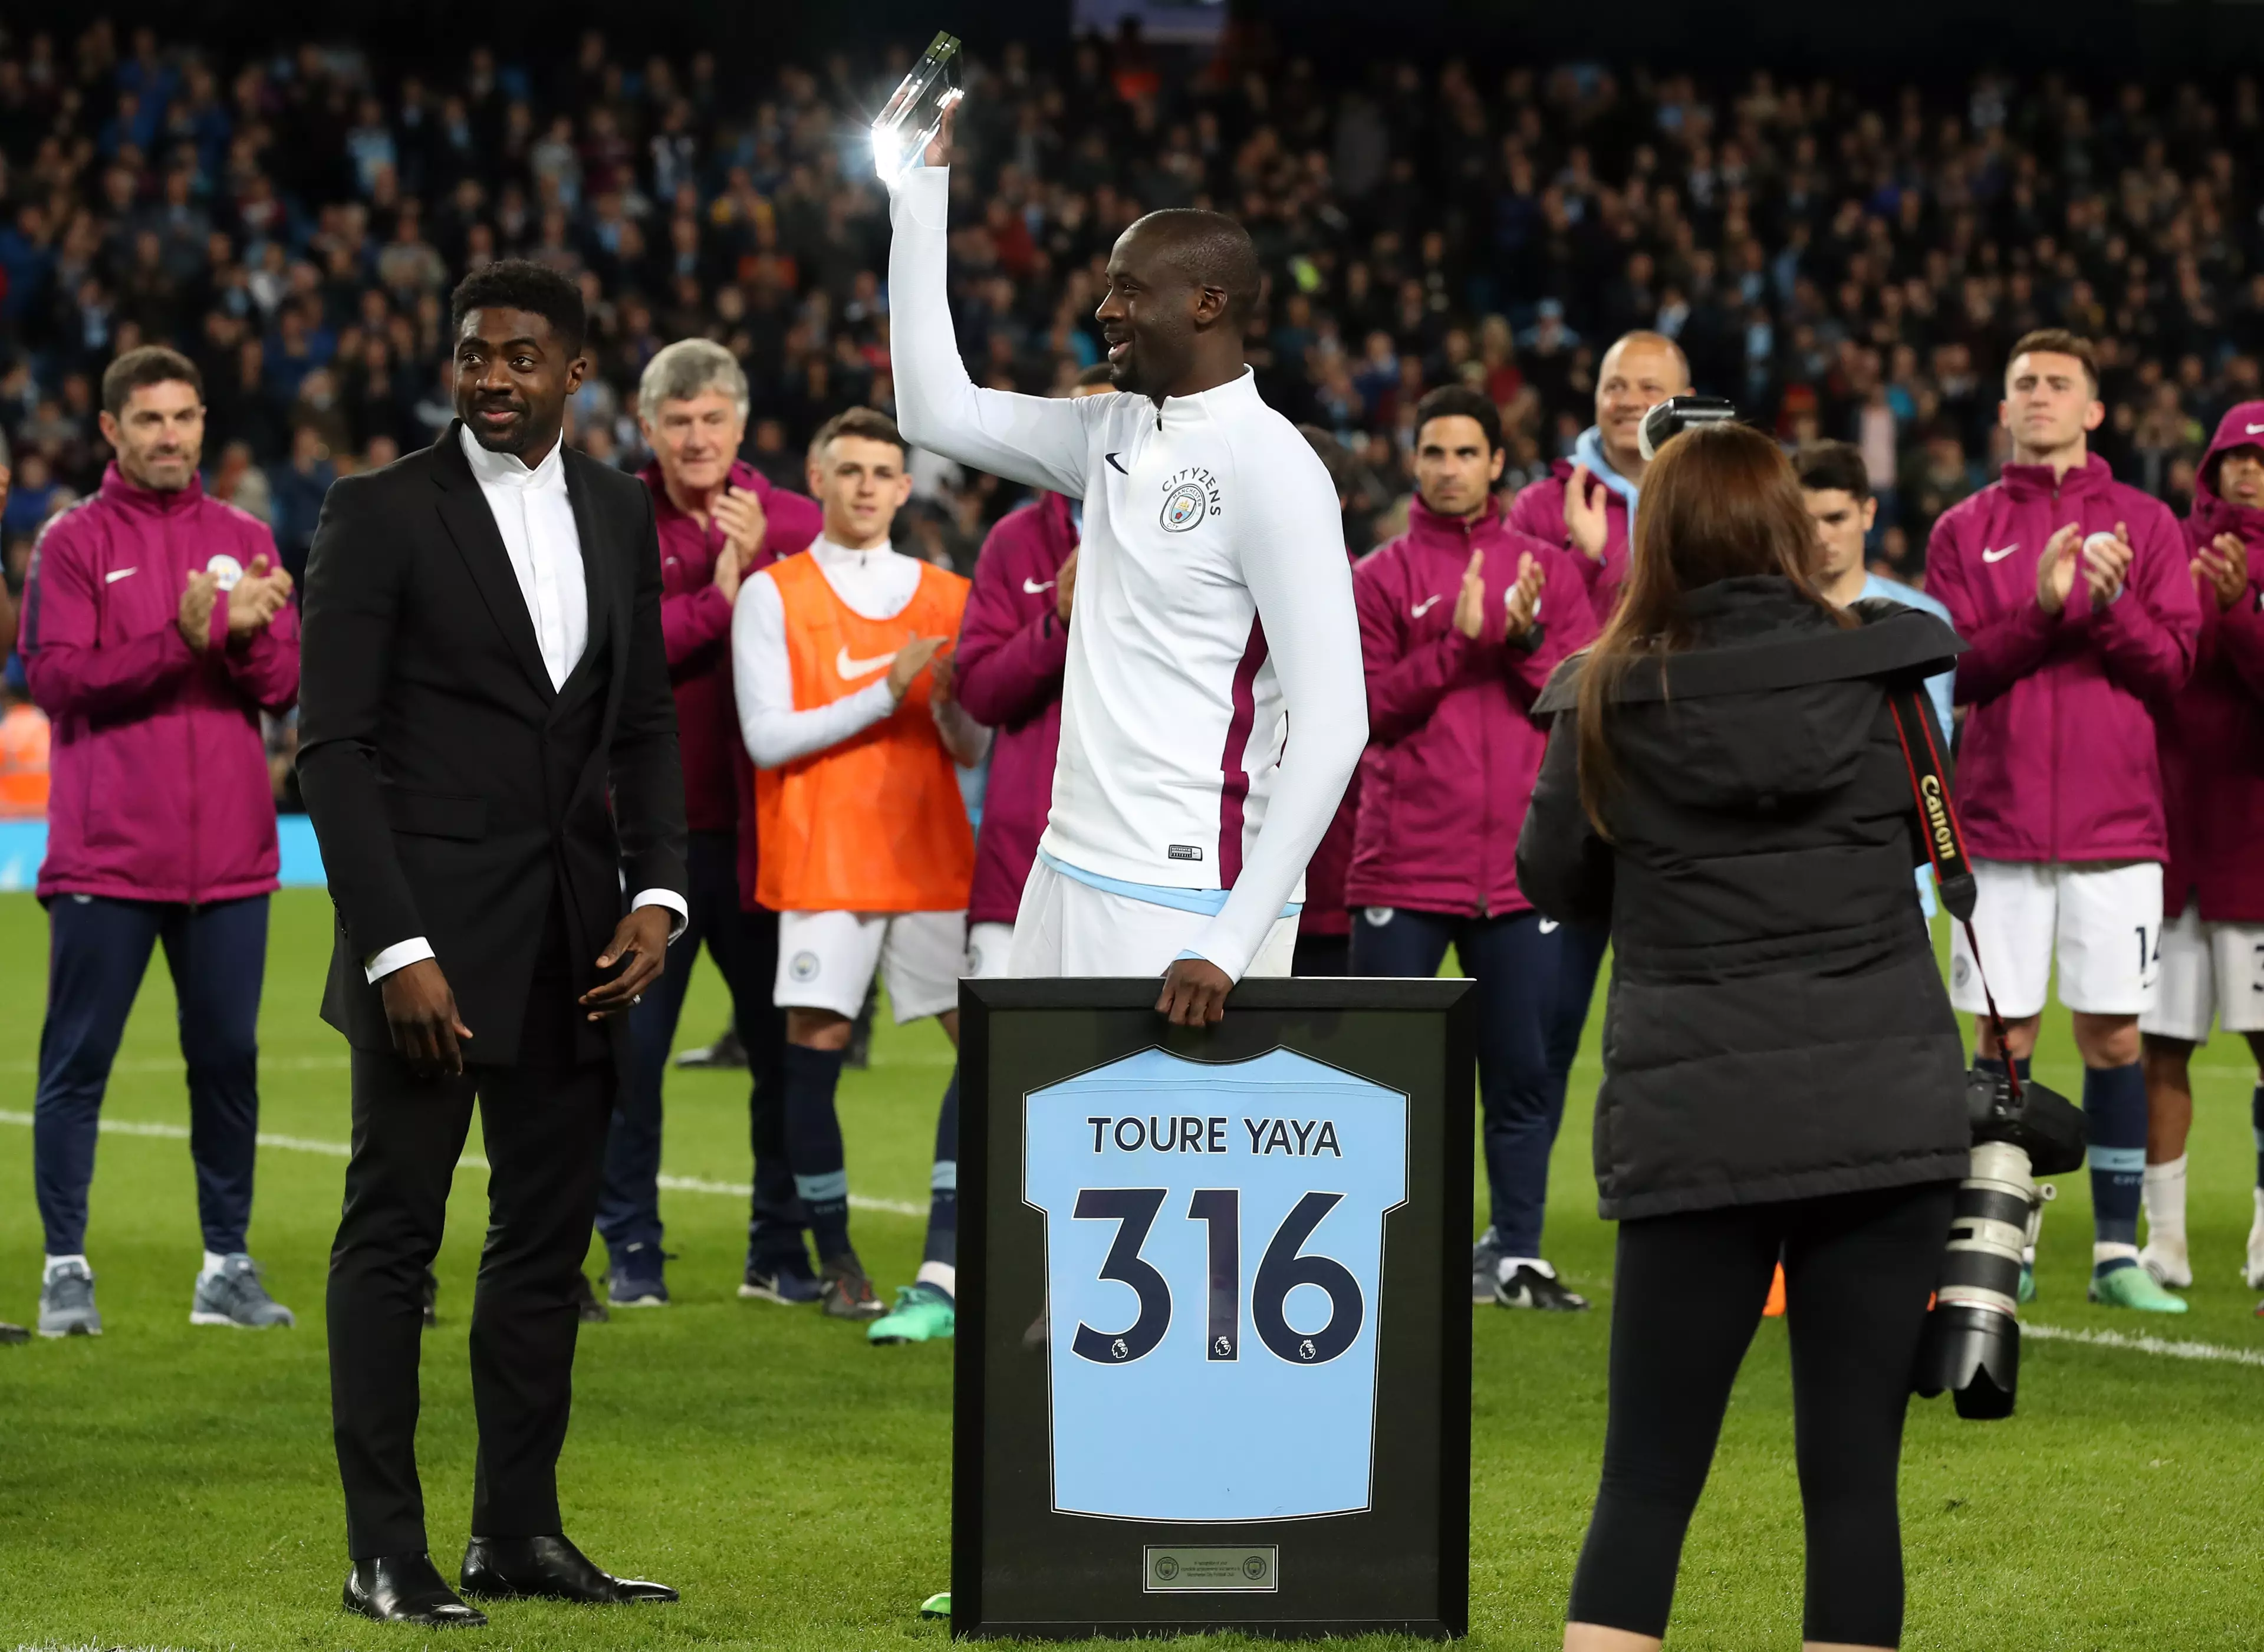 Toure left City at the end of last season. Image: PA Images